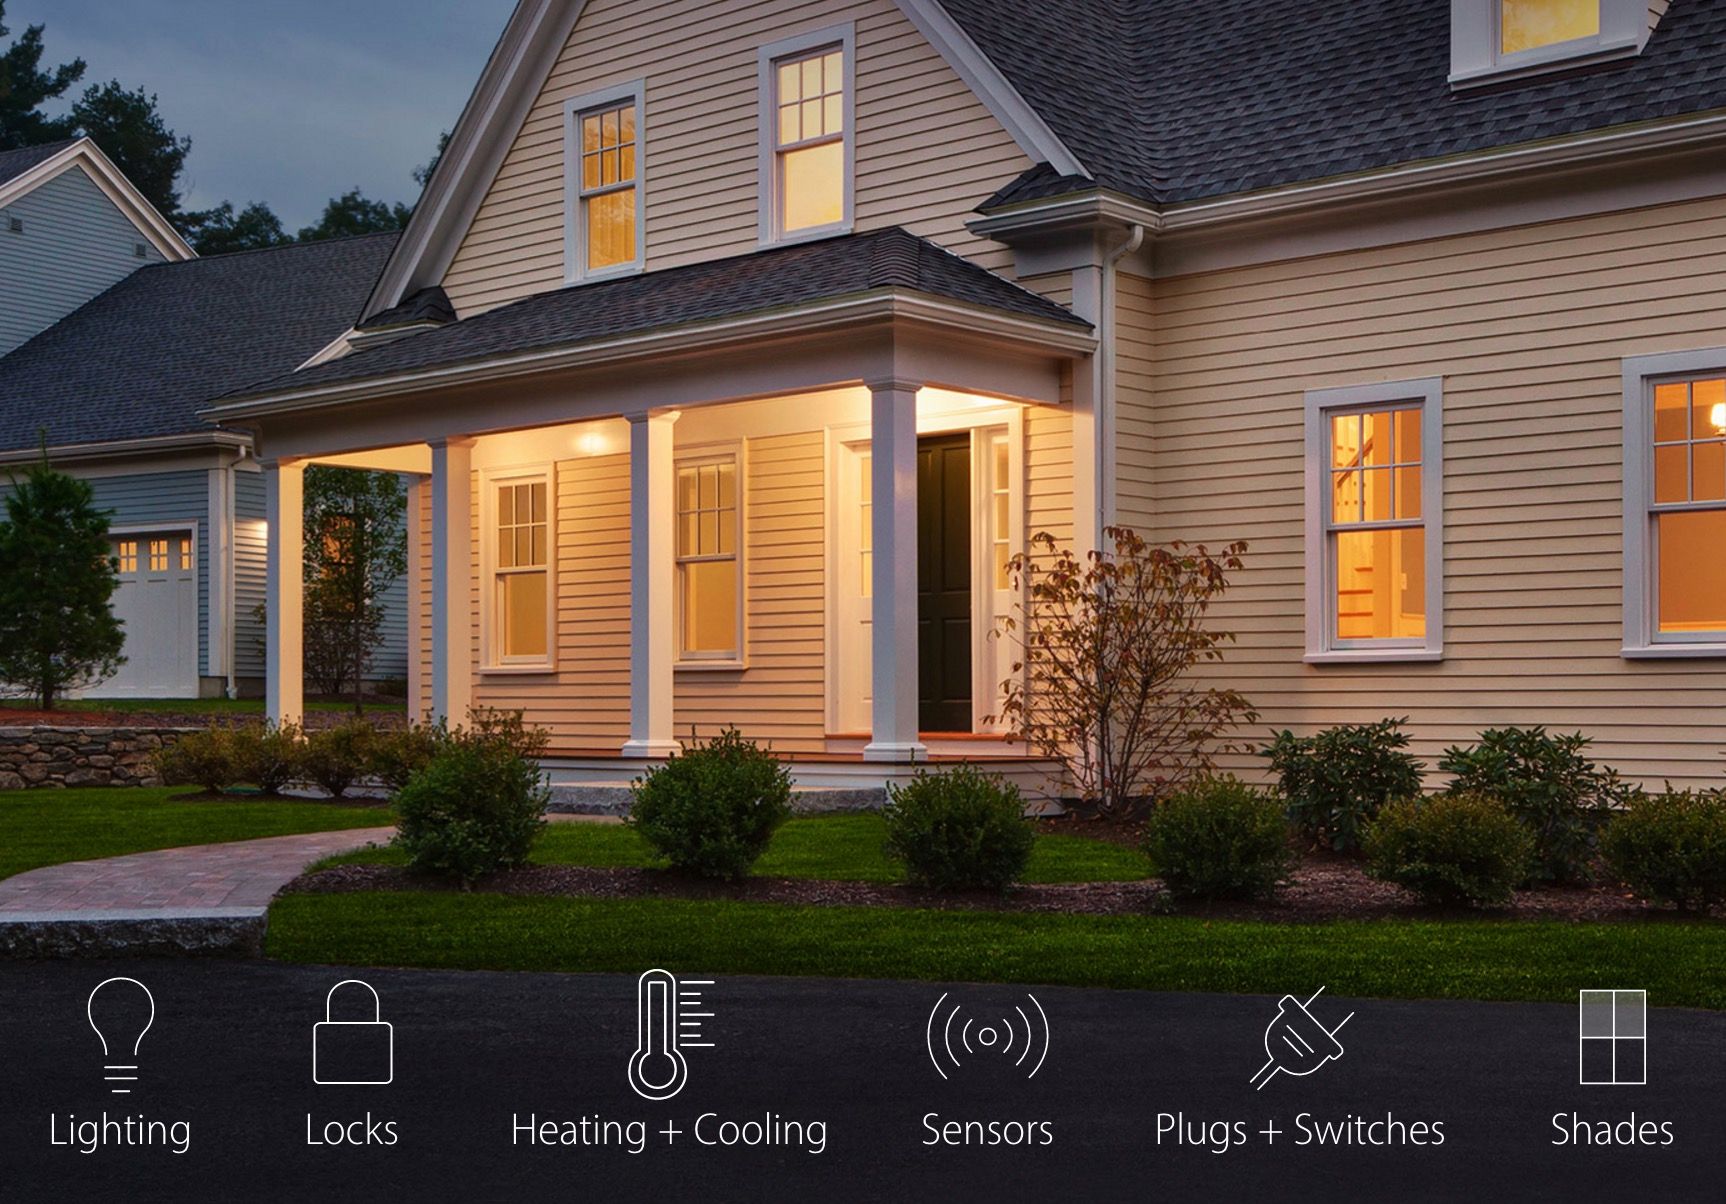 apple homekit and home app what are they and how do they work image 1